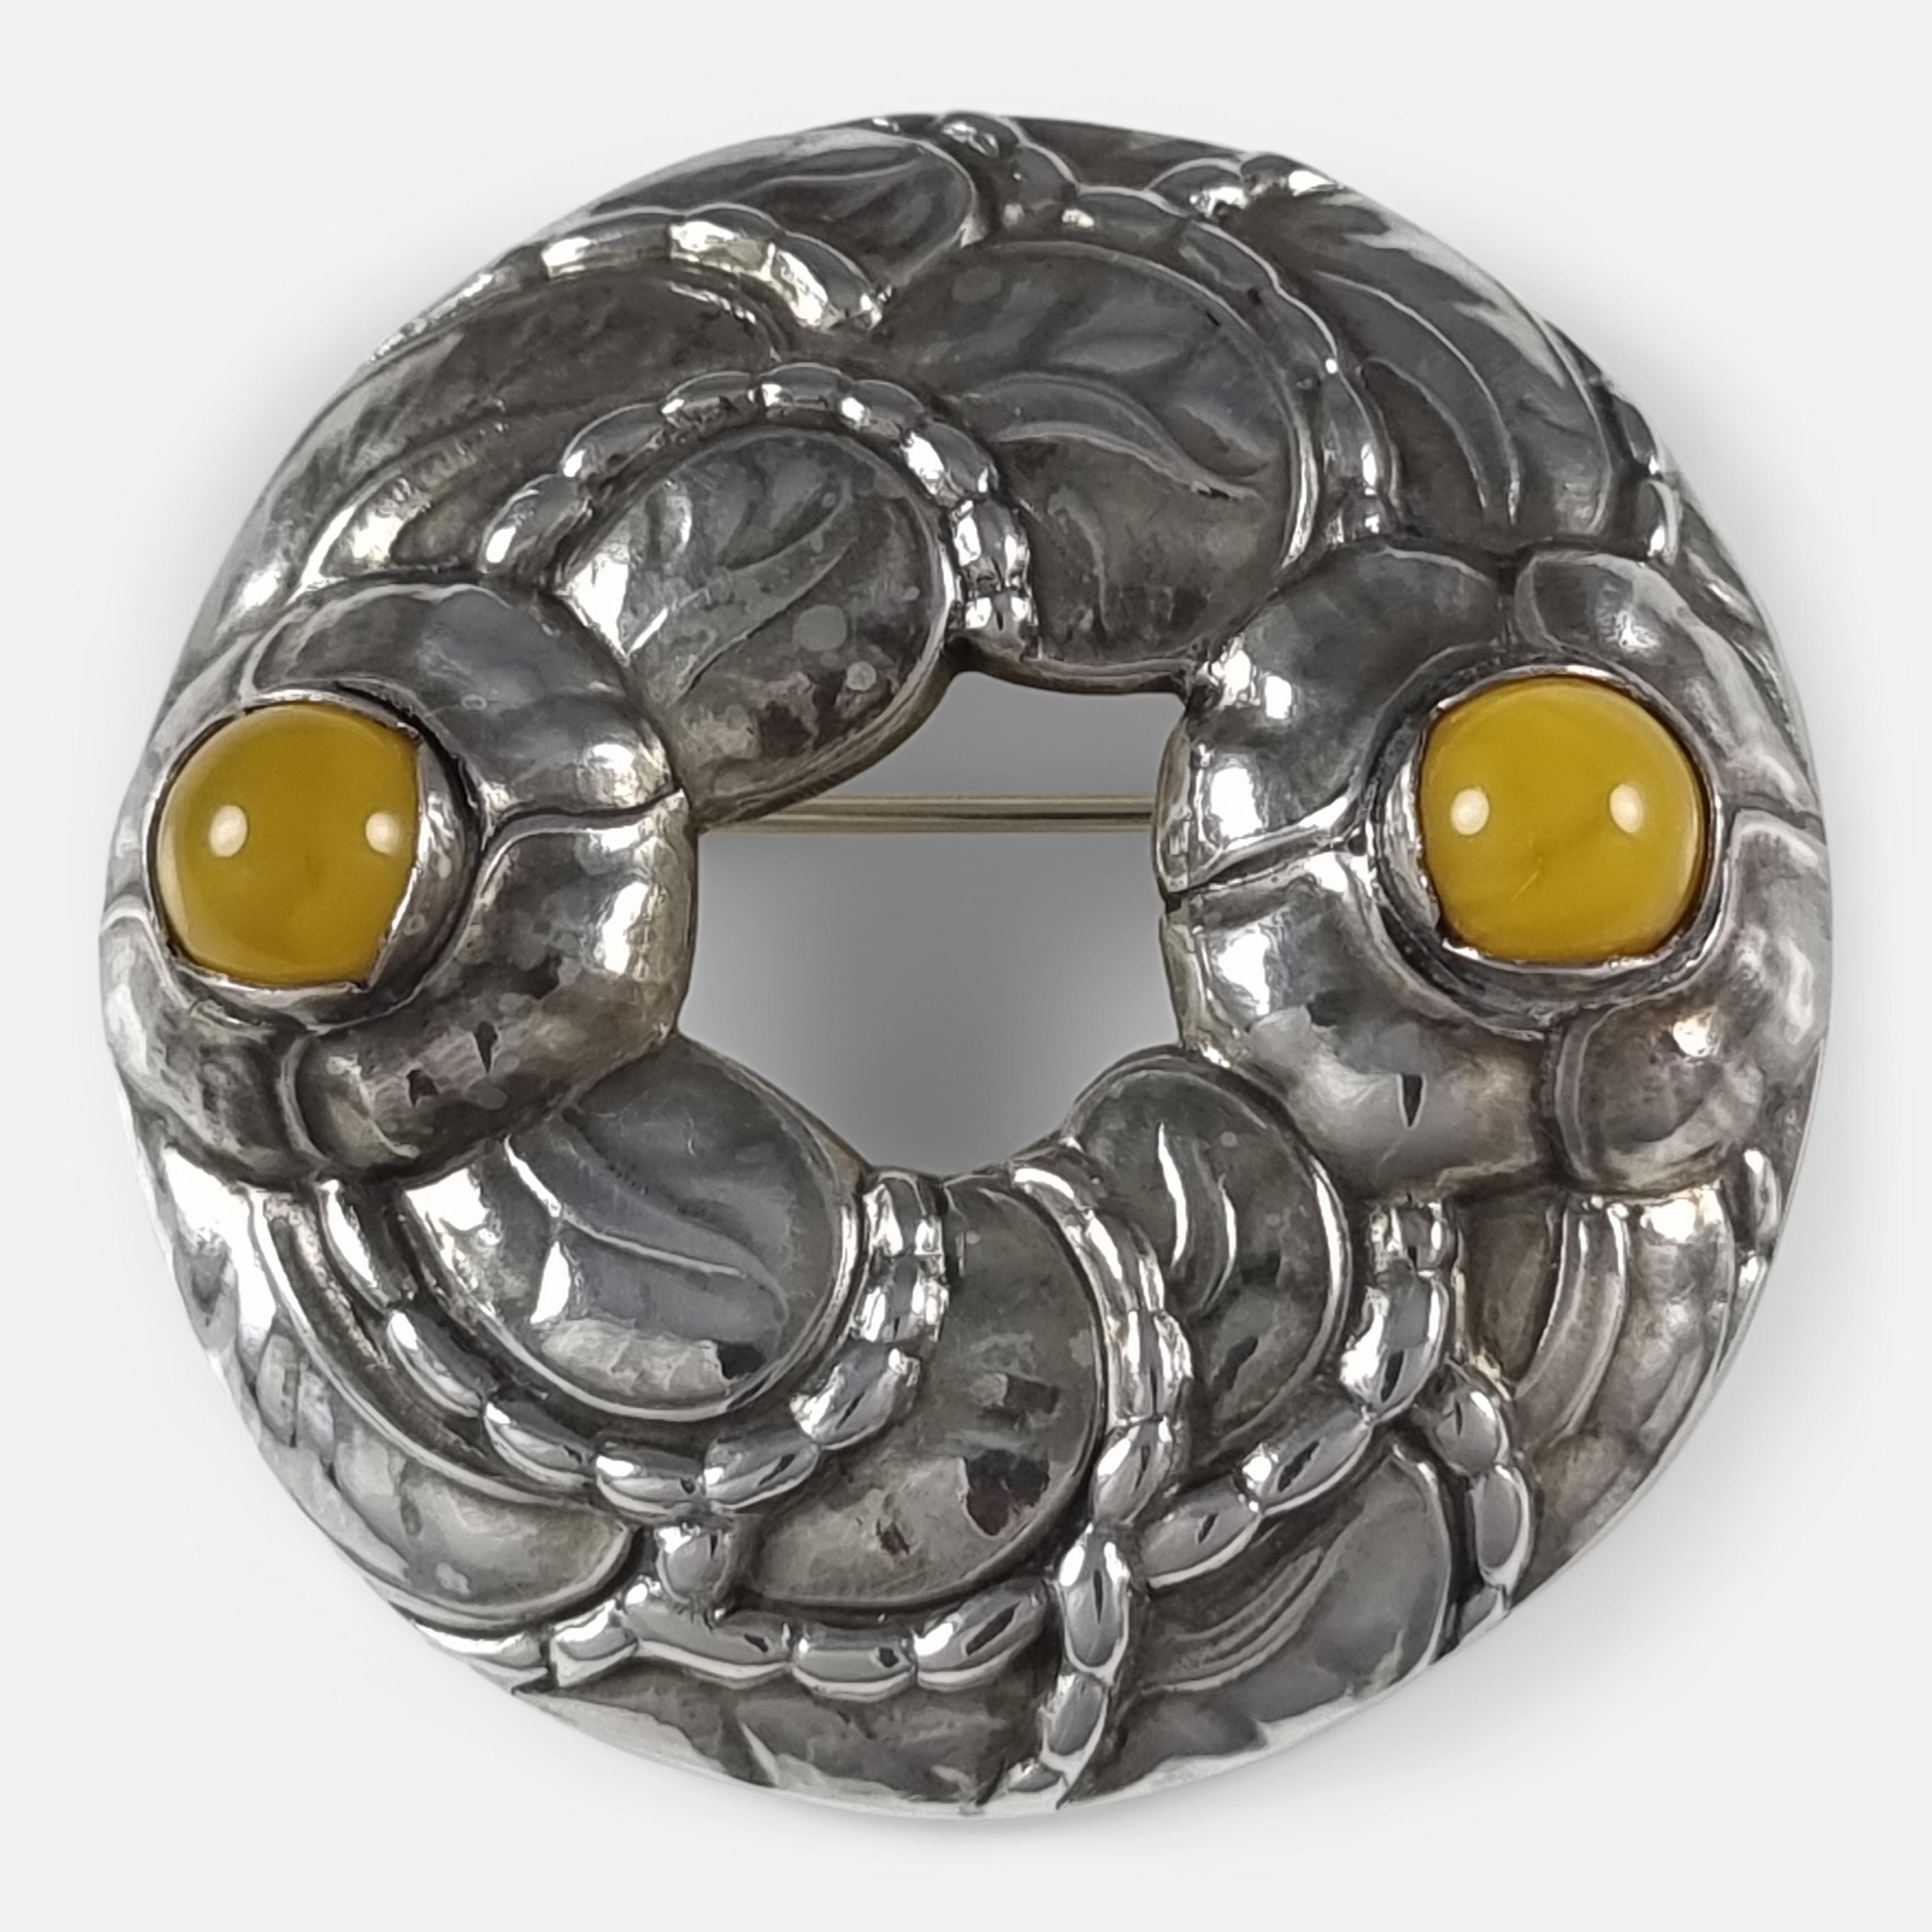 A sterling silver amber anniversary (1904-94) brooch #42, by Georg Jensen.

The brooch is stamped with the Georg Jensen within dotted oval mark, '925 S', 'Denmark', & '42'. Hallmarked with Edinburgh marks.

Period: - Late 20th century.

Date: -